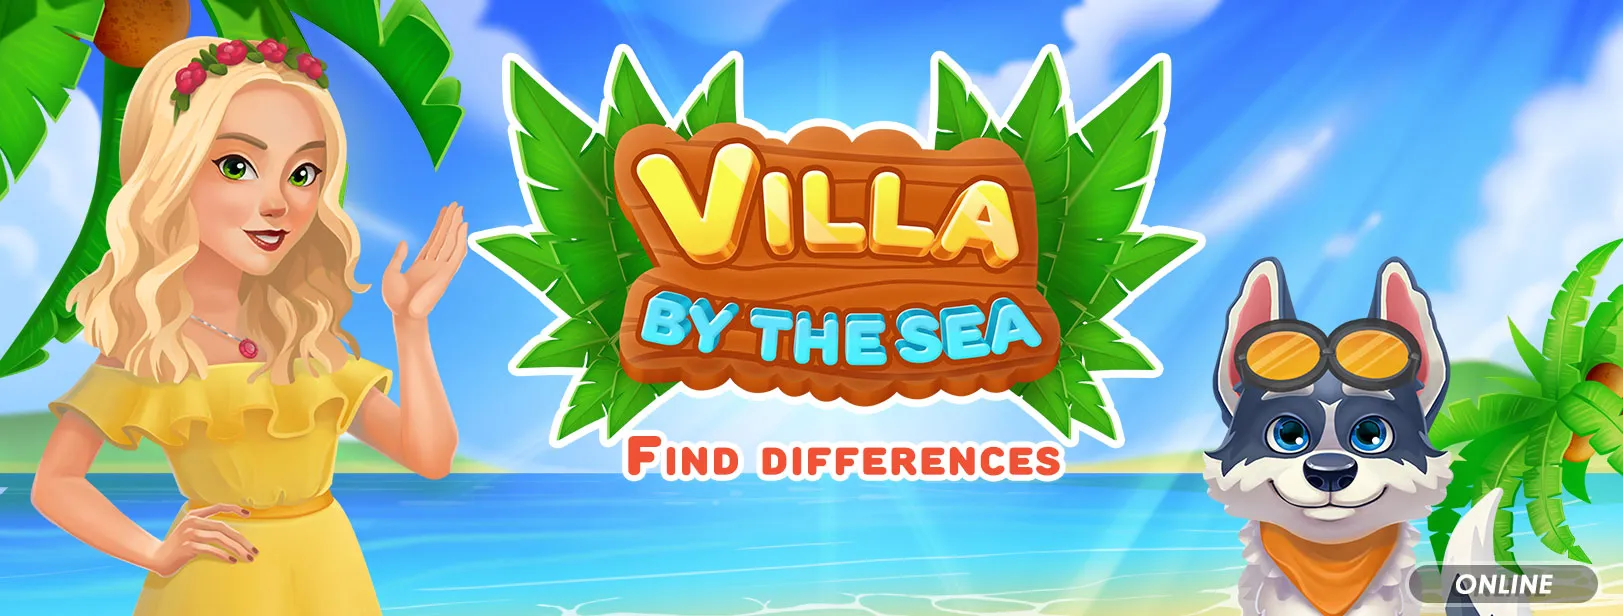 Villa by the sea: Find differences